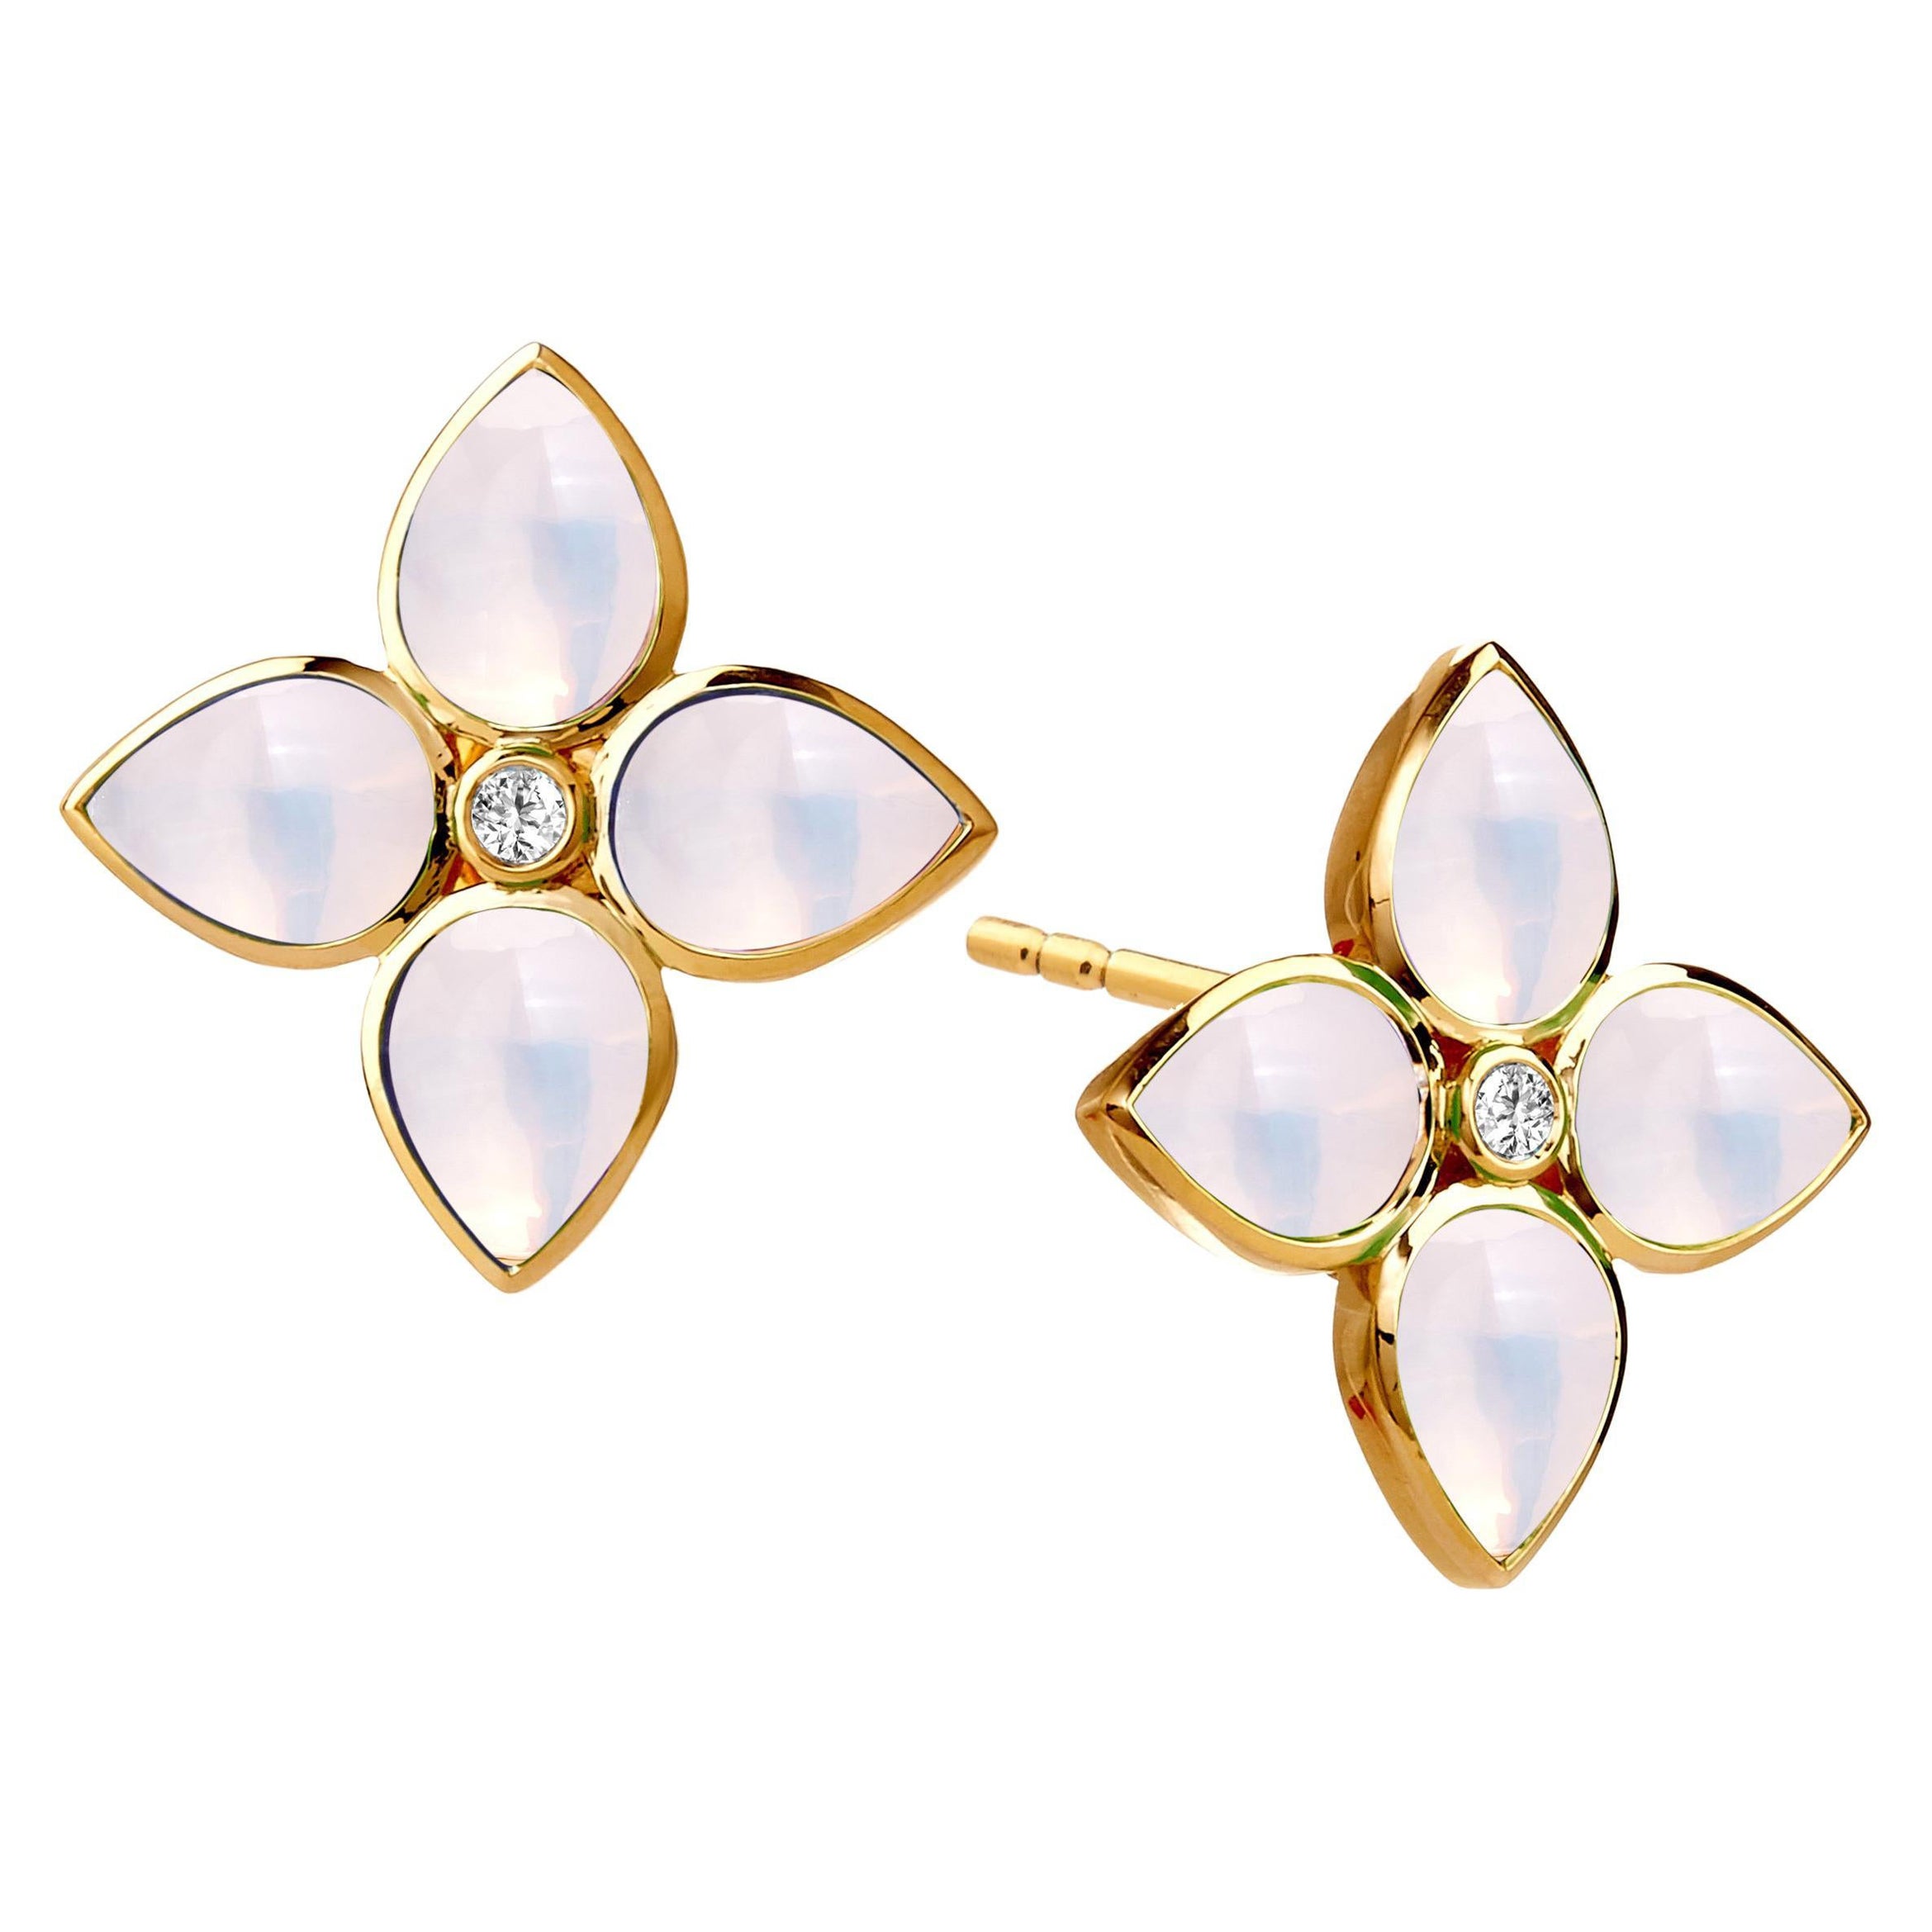 Syna Yellow Gold Moon Quartz Earrings with Diamonds